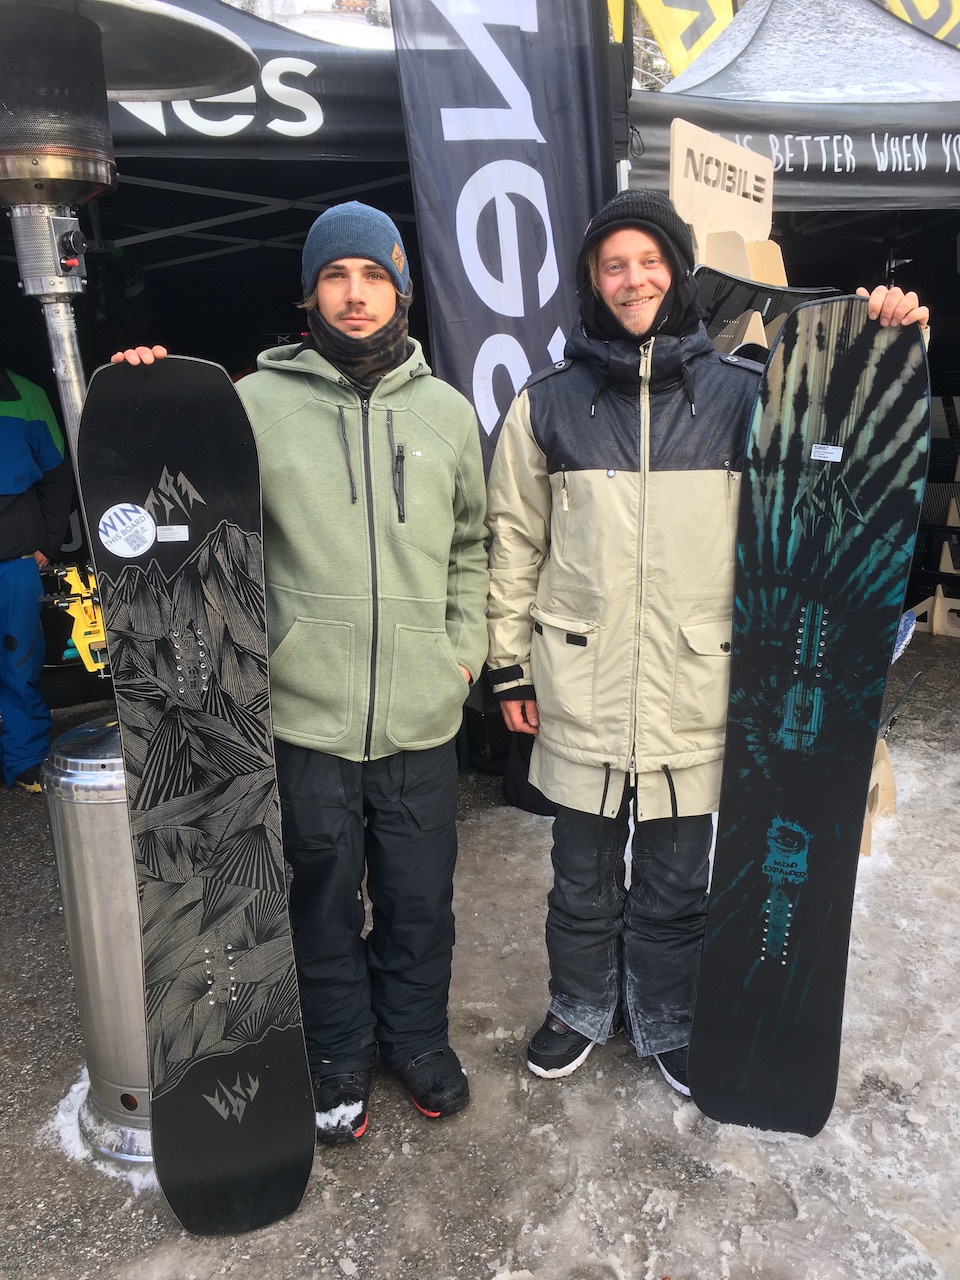 Jones’ Daniel Vonch with the Ultra Mountain Twin and Stefan Guettinger with the full rocker Mind Expander